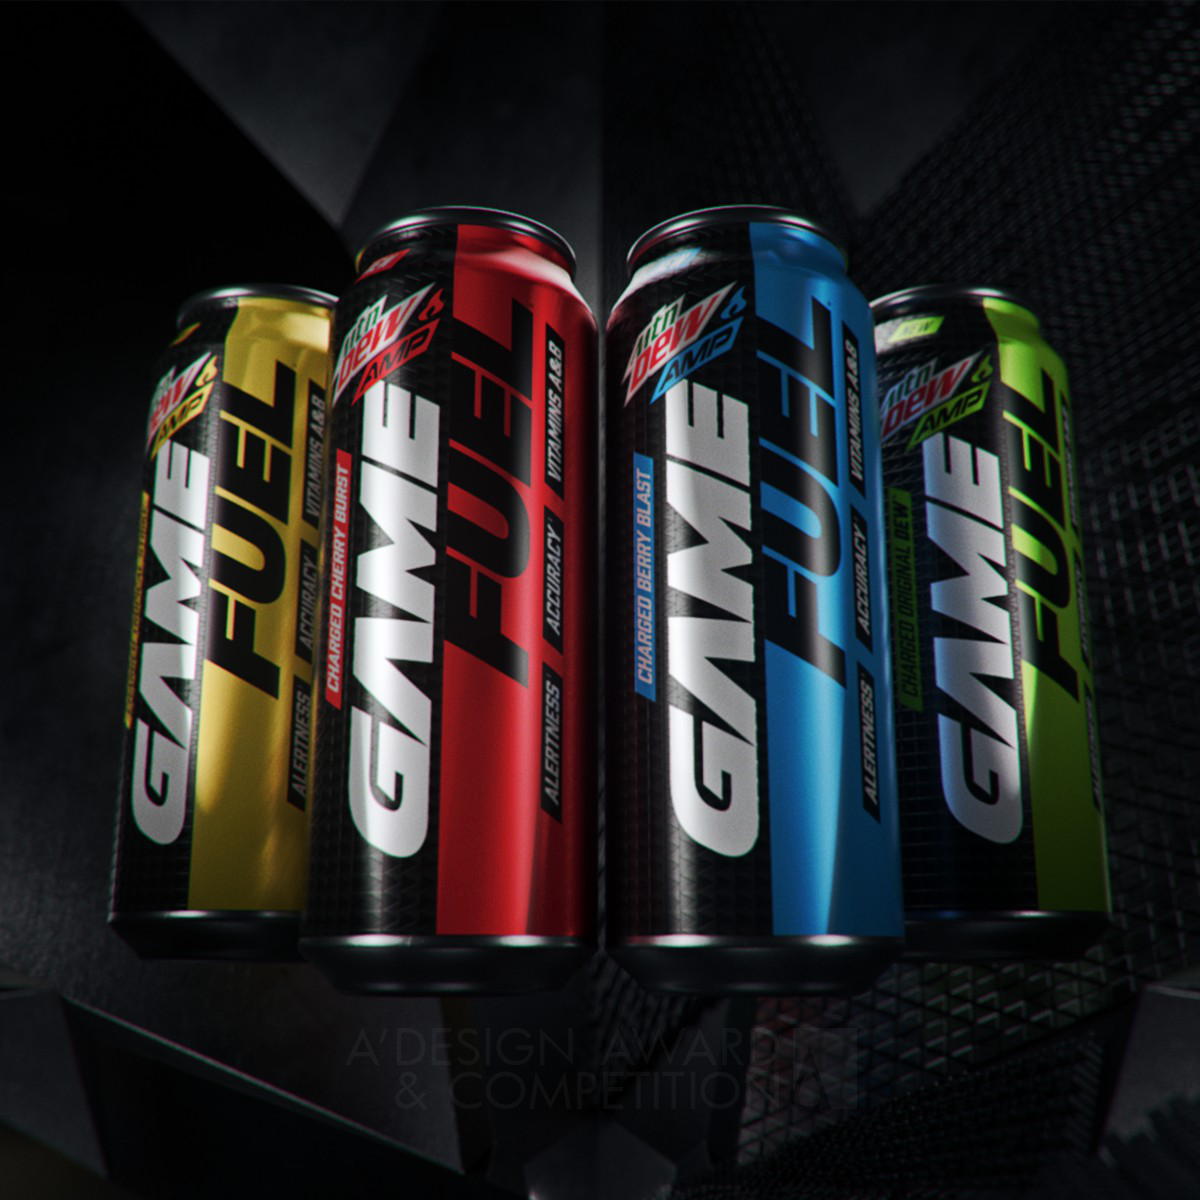 Mtn Dew AMP Game Fuel Launch Packaging by PepsiCo Design and Innovation